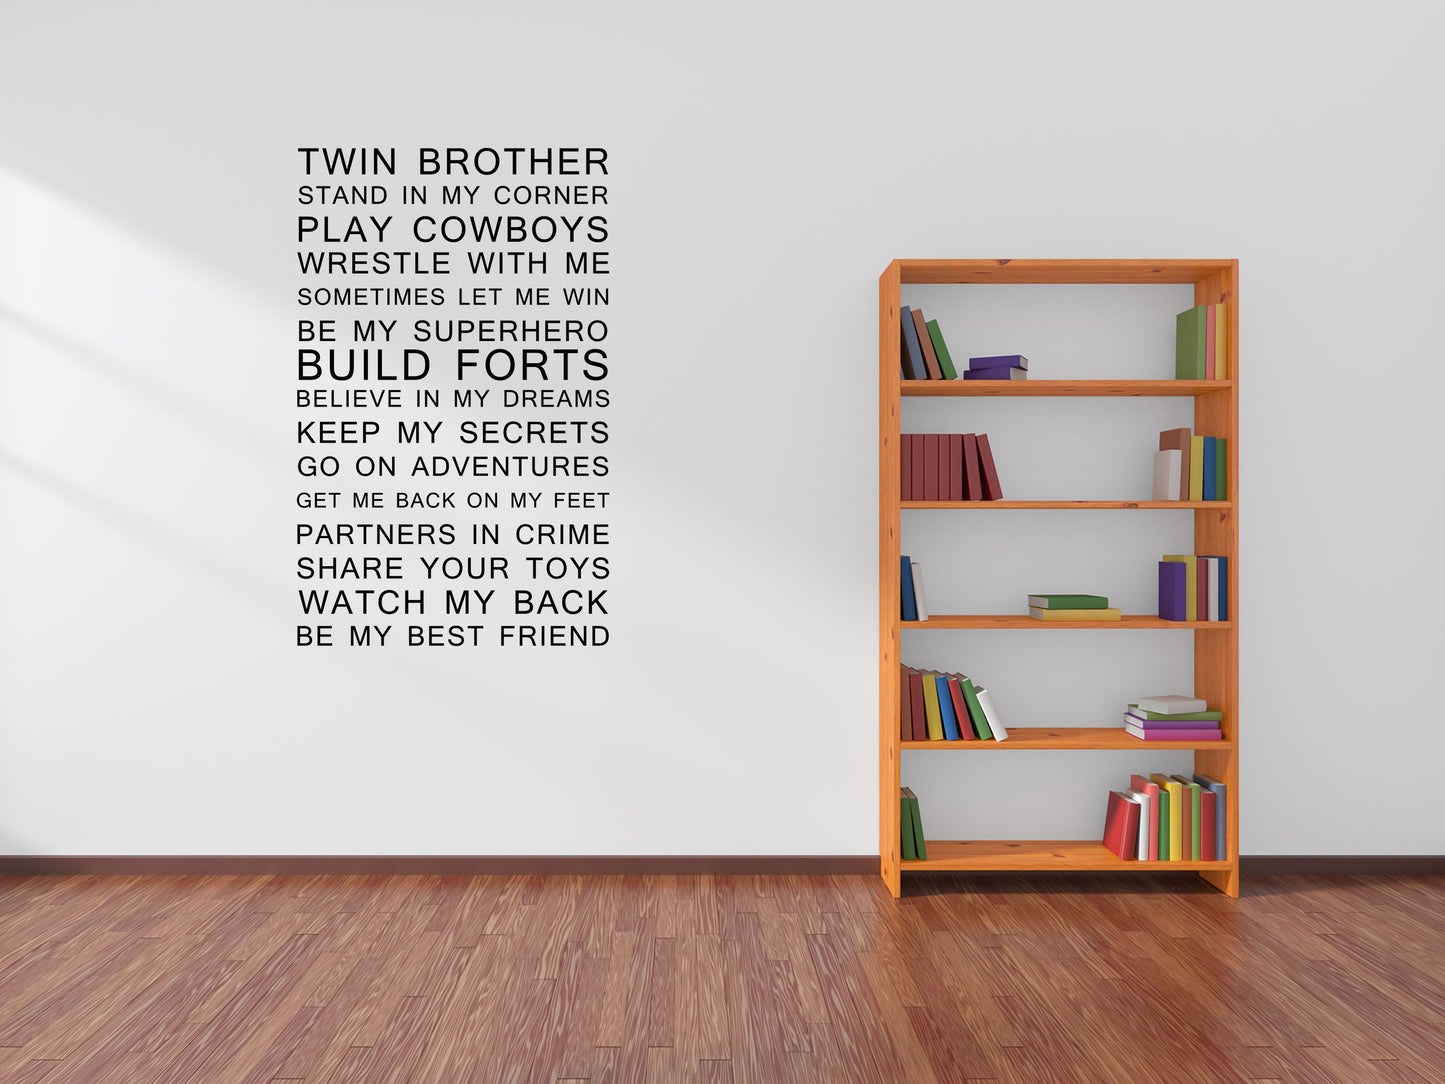 Twin Brother - Inspirational Wall Signs Vinyl Wall Decal Inspirational Wall Signs 